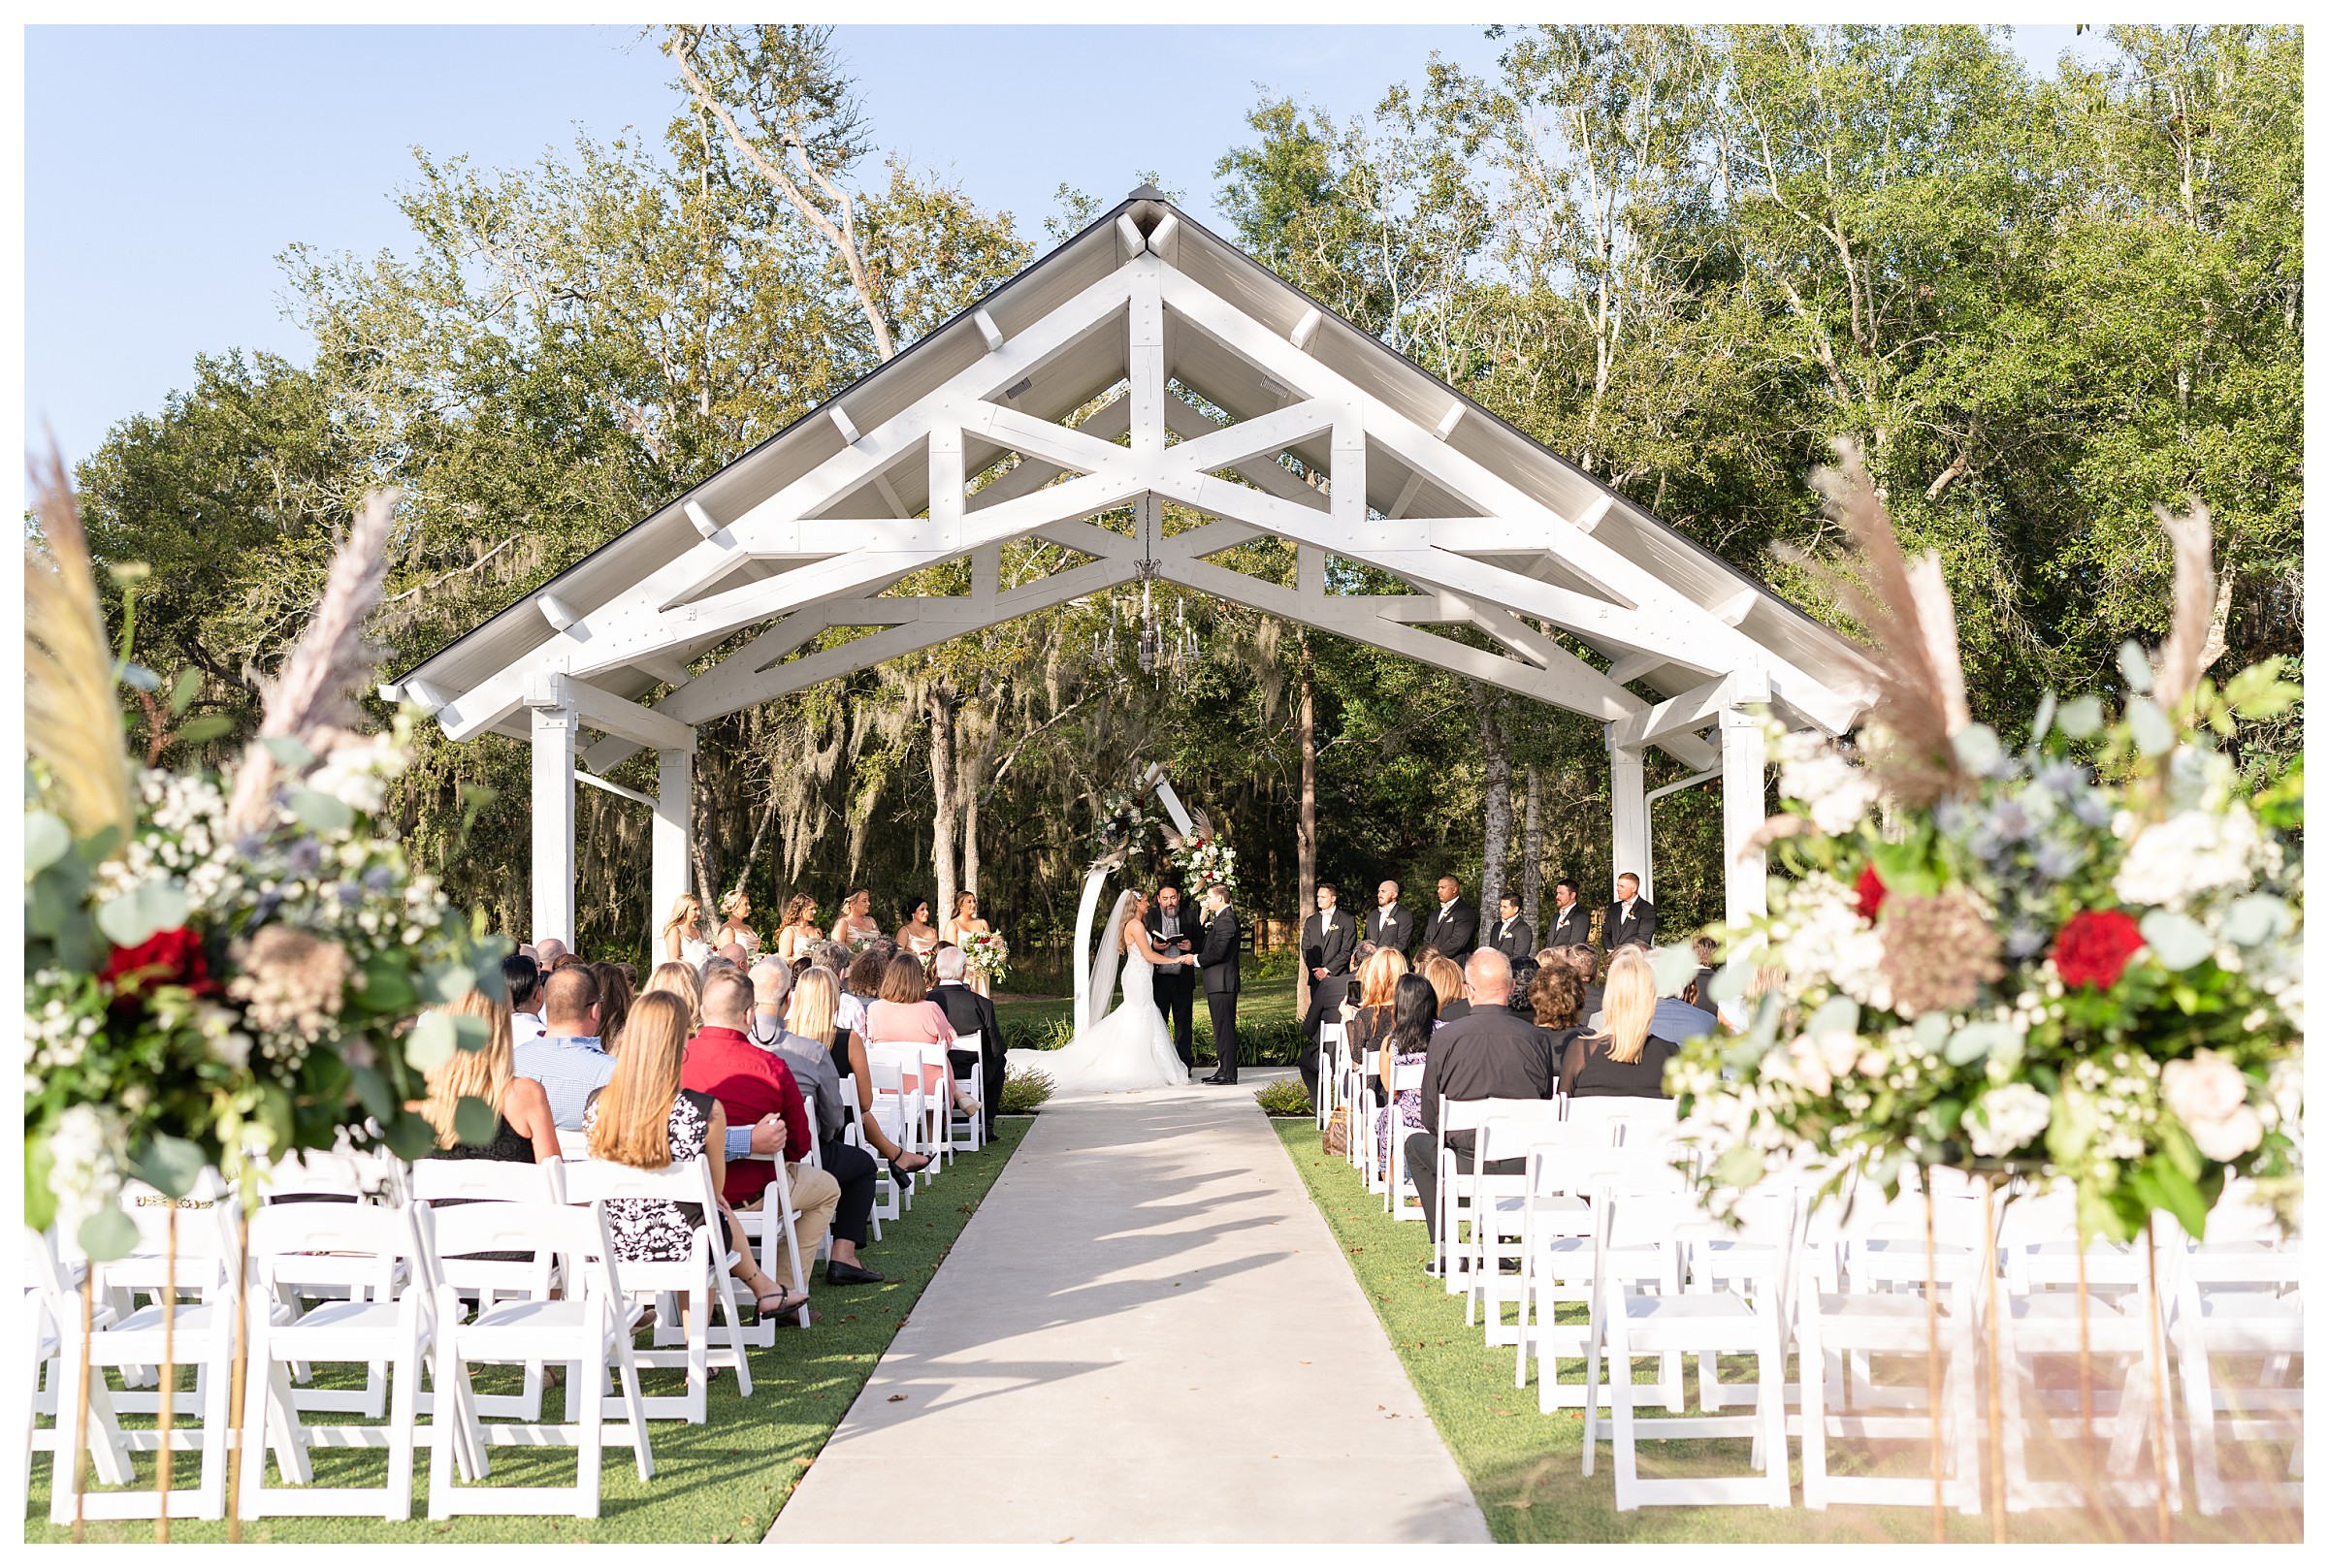 Bride and Groom at the alter during the ceremony while guests watch on in an outdoor ceremony site at the Springs Wallisville in Houston